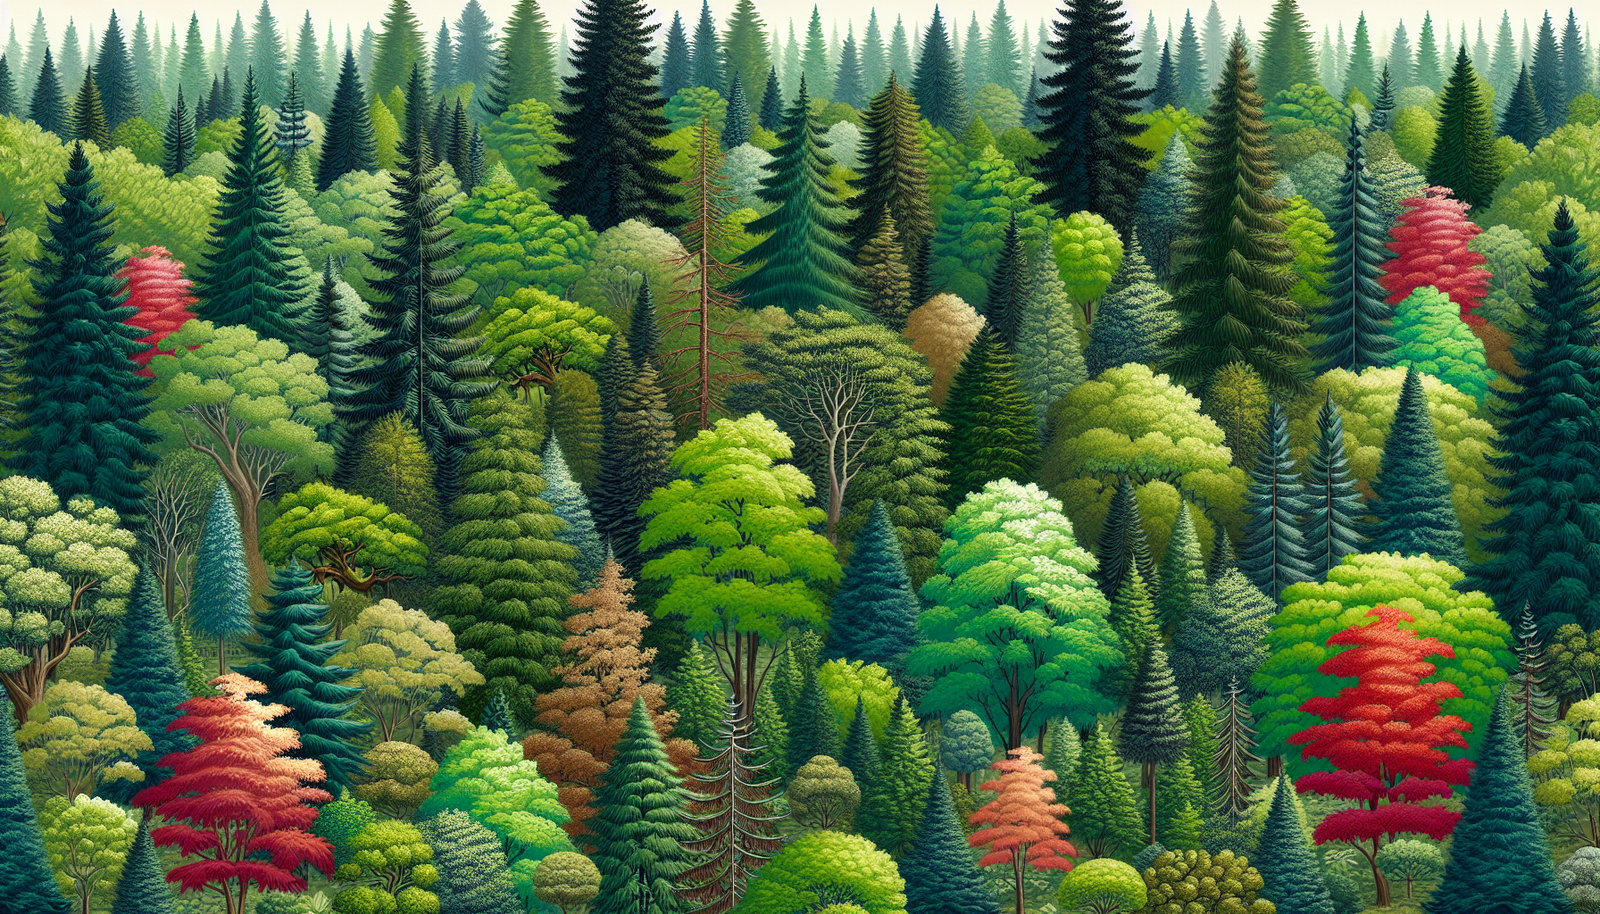 Illustration of various types of deciduous and evergreen trees